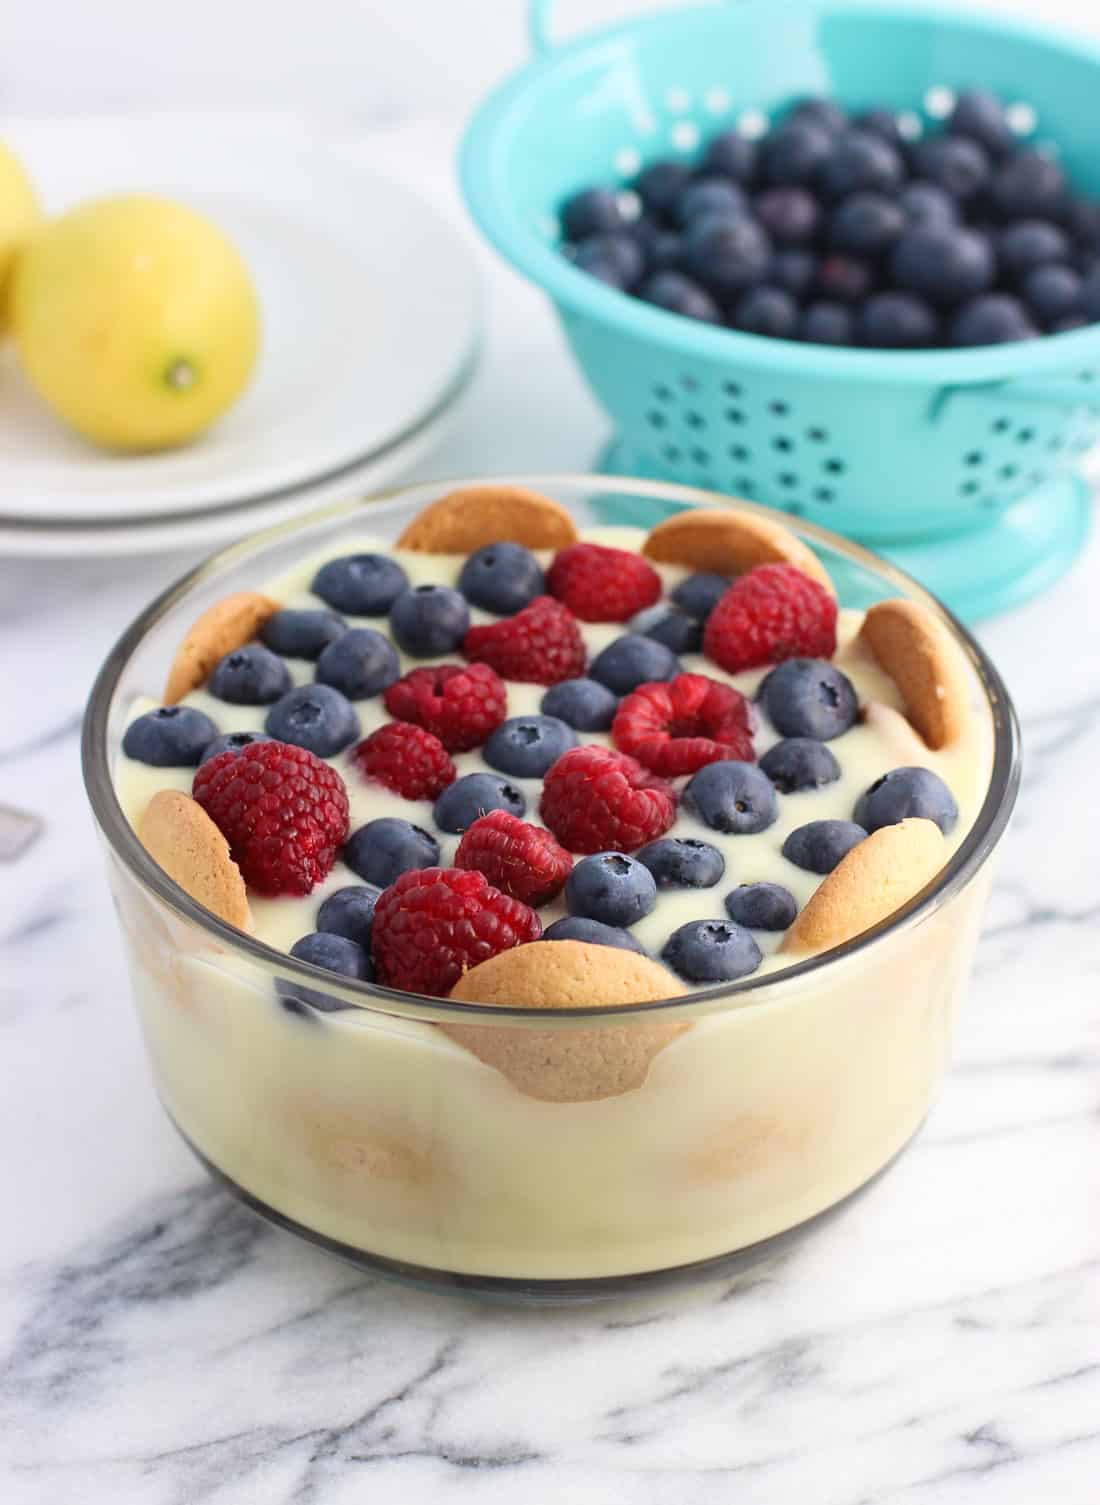 A glass bowl filled with lemon pudding topped with wafers and berries.